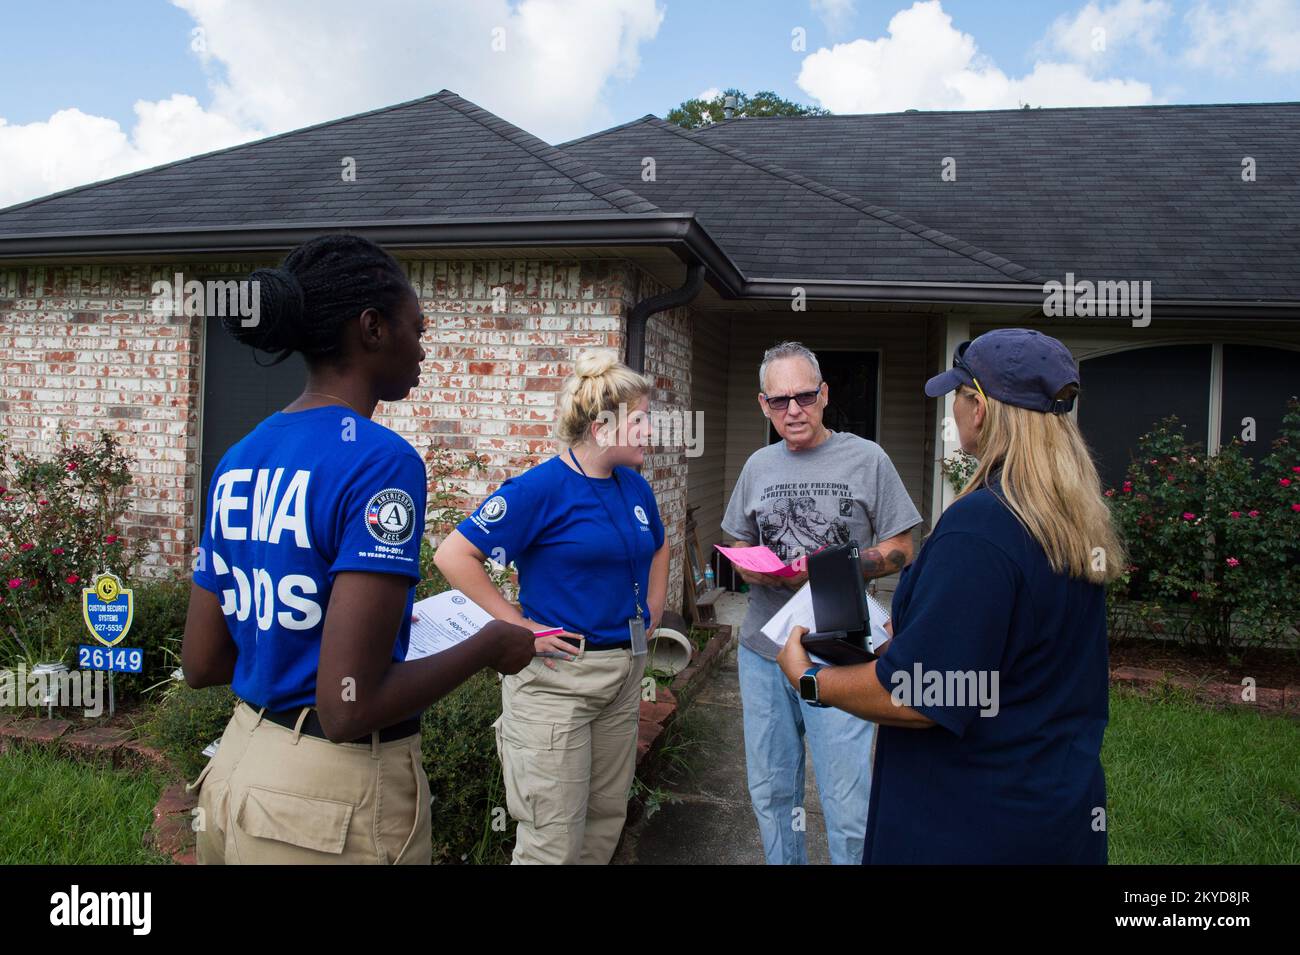 FEMA Disaster Survivor Assistant (DSA) Karyn Wolfe (right) and FEMA Corps members Nakiya Soloman (left) and Raven Rospierski answer questions from flood survivor Michael Jeffirs outside of his damaged home in Denham Springs, La. DSA teams canvasses neighborhoods daily in disaster affected areas, going door to door to ensure survivors have registered with FEMA and to report potential emergencies.. Louisiana Severe Storms and Flooding. Photographs Relating to Disasters and Emergency Management Programs, Activities, and Officials Stock Photo